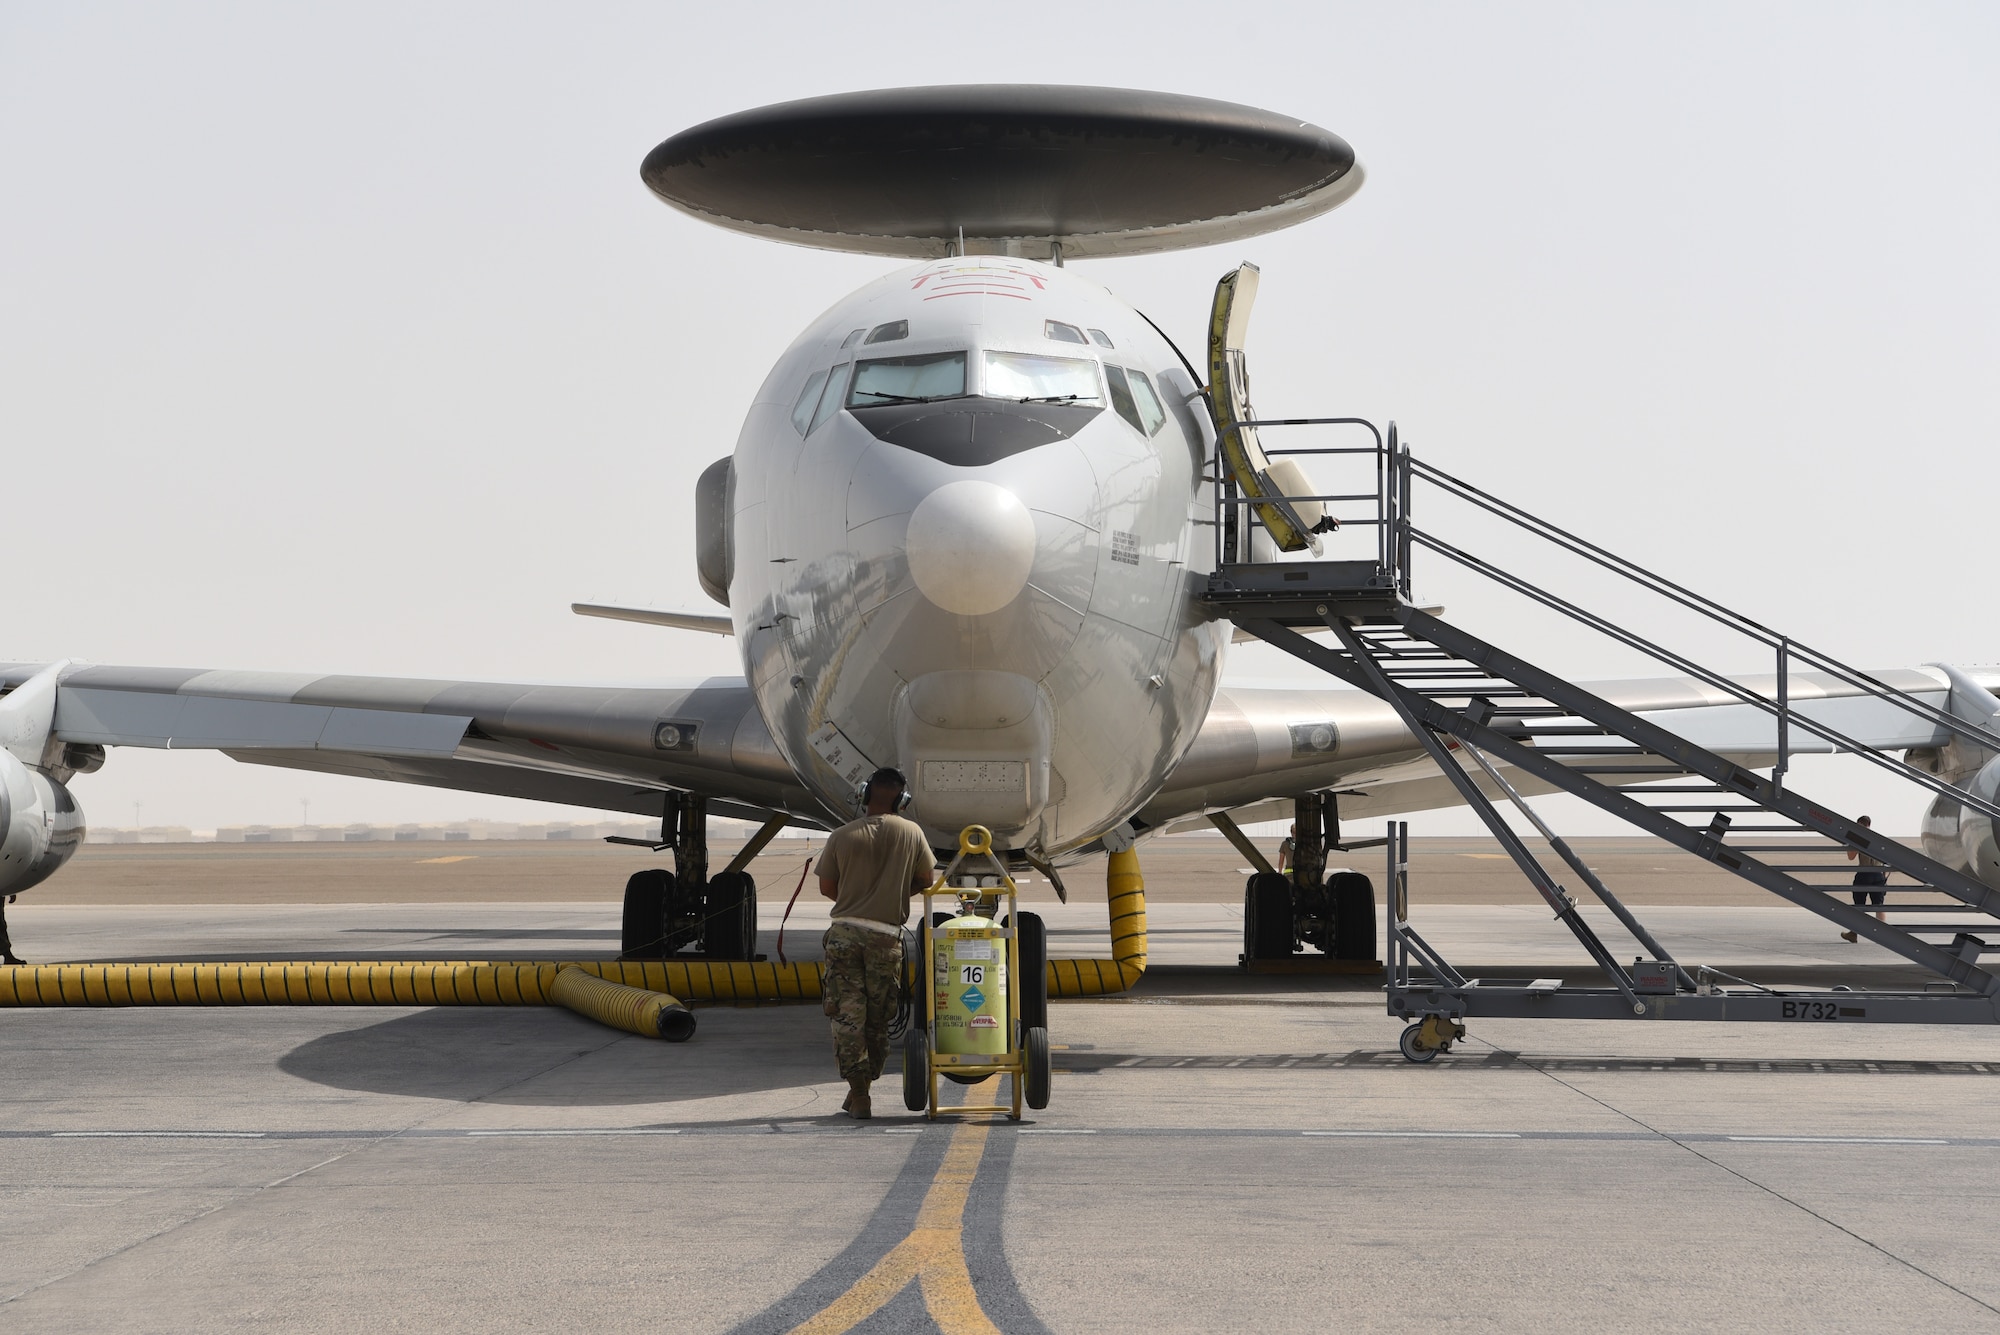 A crew chief assigned to the 380th Expeditionary Aircraft Maintenance Squadron waits in front of the E-3 Sentry on Al Dhafra Air Base, United Arab Emirates, June 26, 2019.